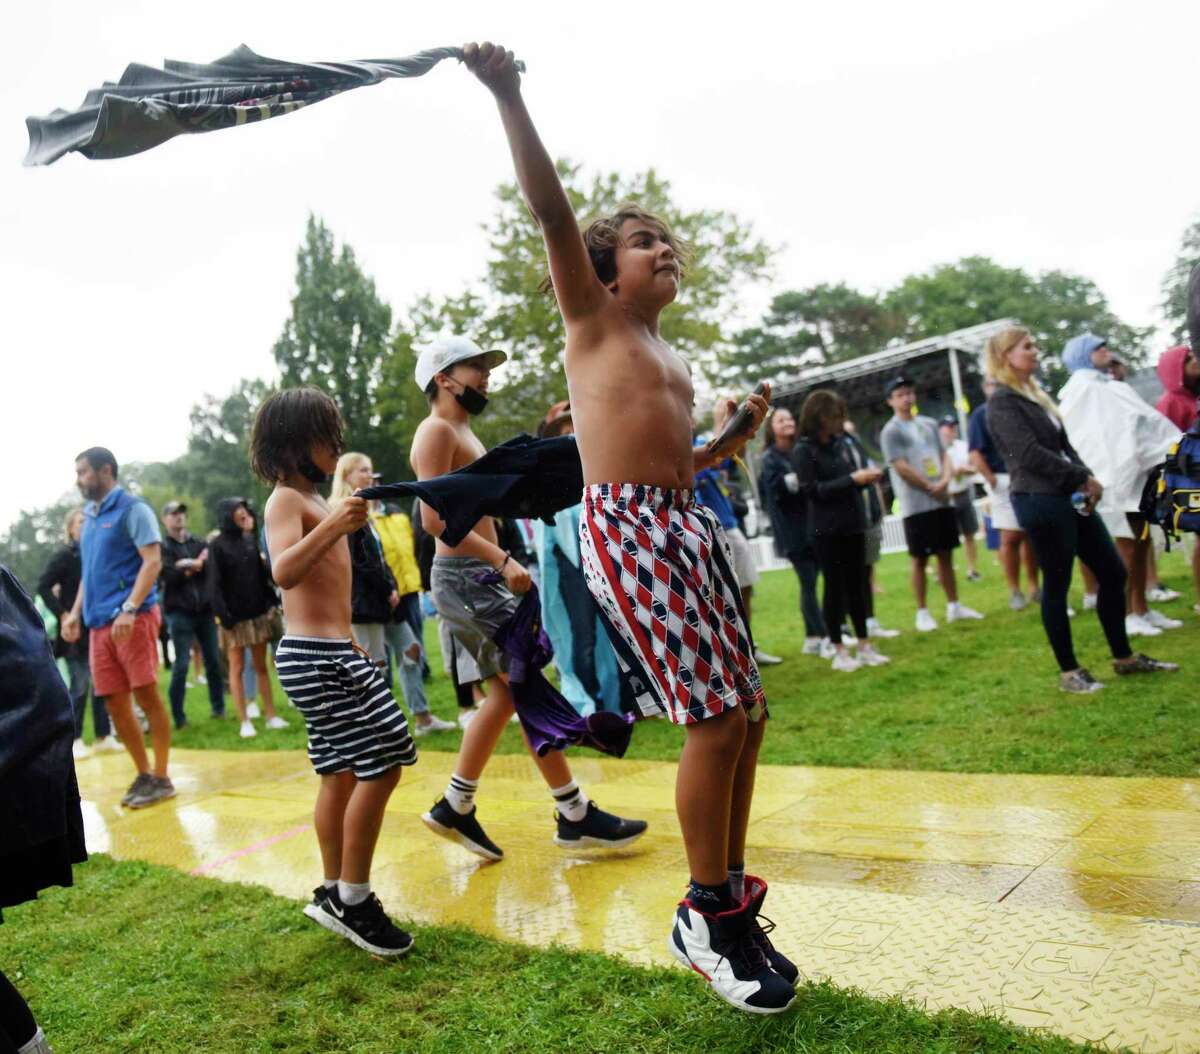 Kids dance in the rain as country singer-songwriter Caroline Jones, a Greenwich native, performs at the Greenwich Town Party at Roger Sherman Baldwin Park in Greenwich, Conn. on Sunday, Sept. 5, 2021. For 2022, the GTP is set to return to its May date and a ticket lottery is open for all town residents and Greenwich business owners and employees who want a chance to go.